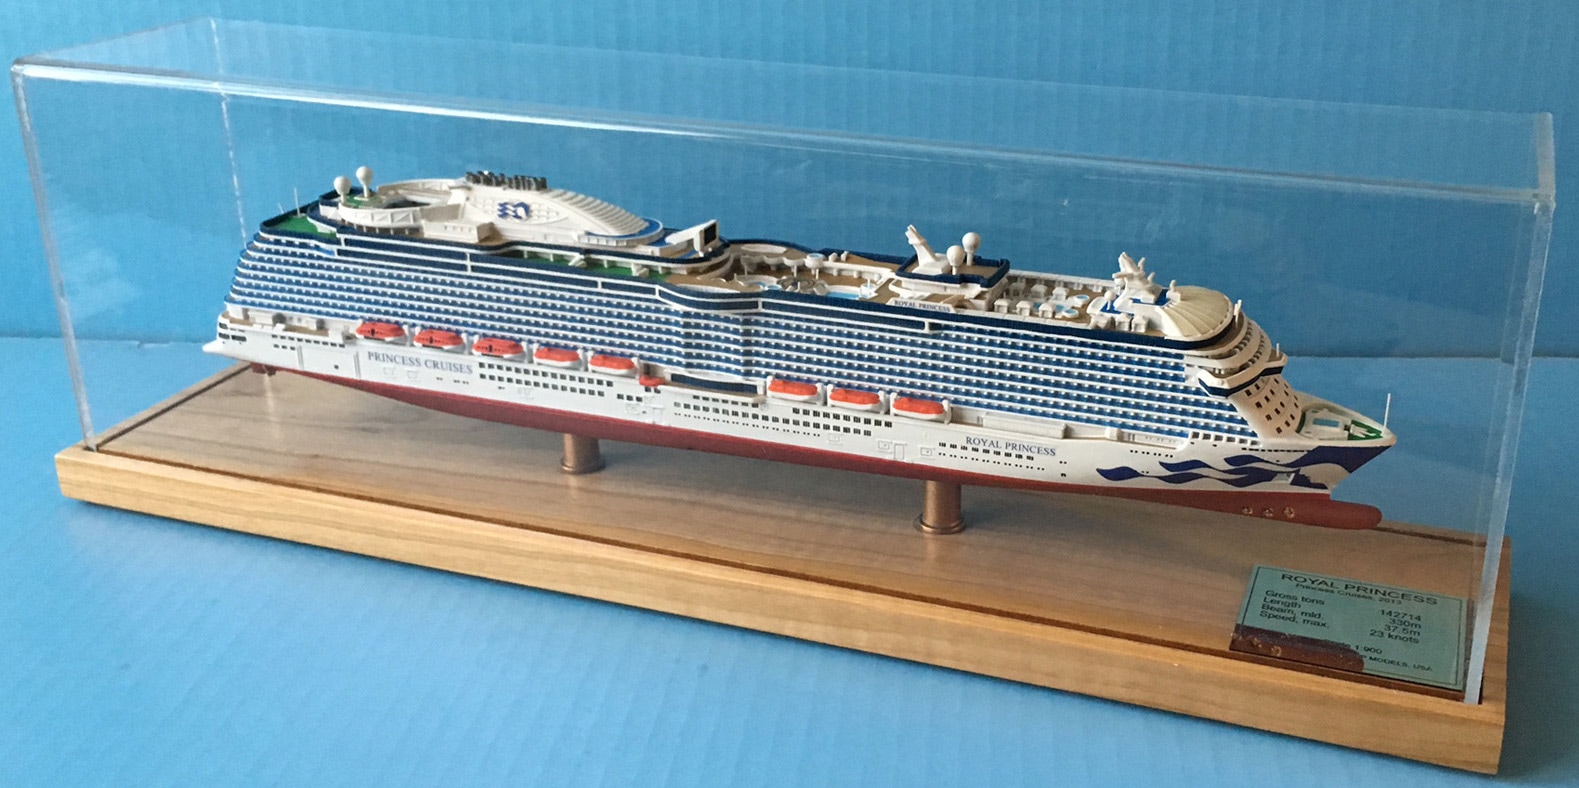 Royal Princess cruise ship model in post 2016 refit livery